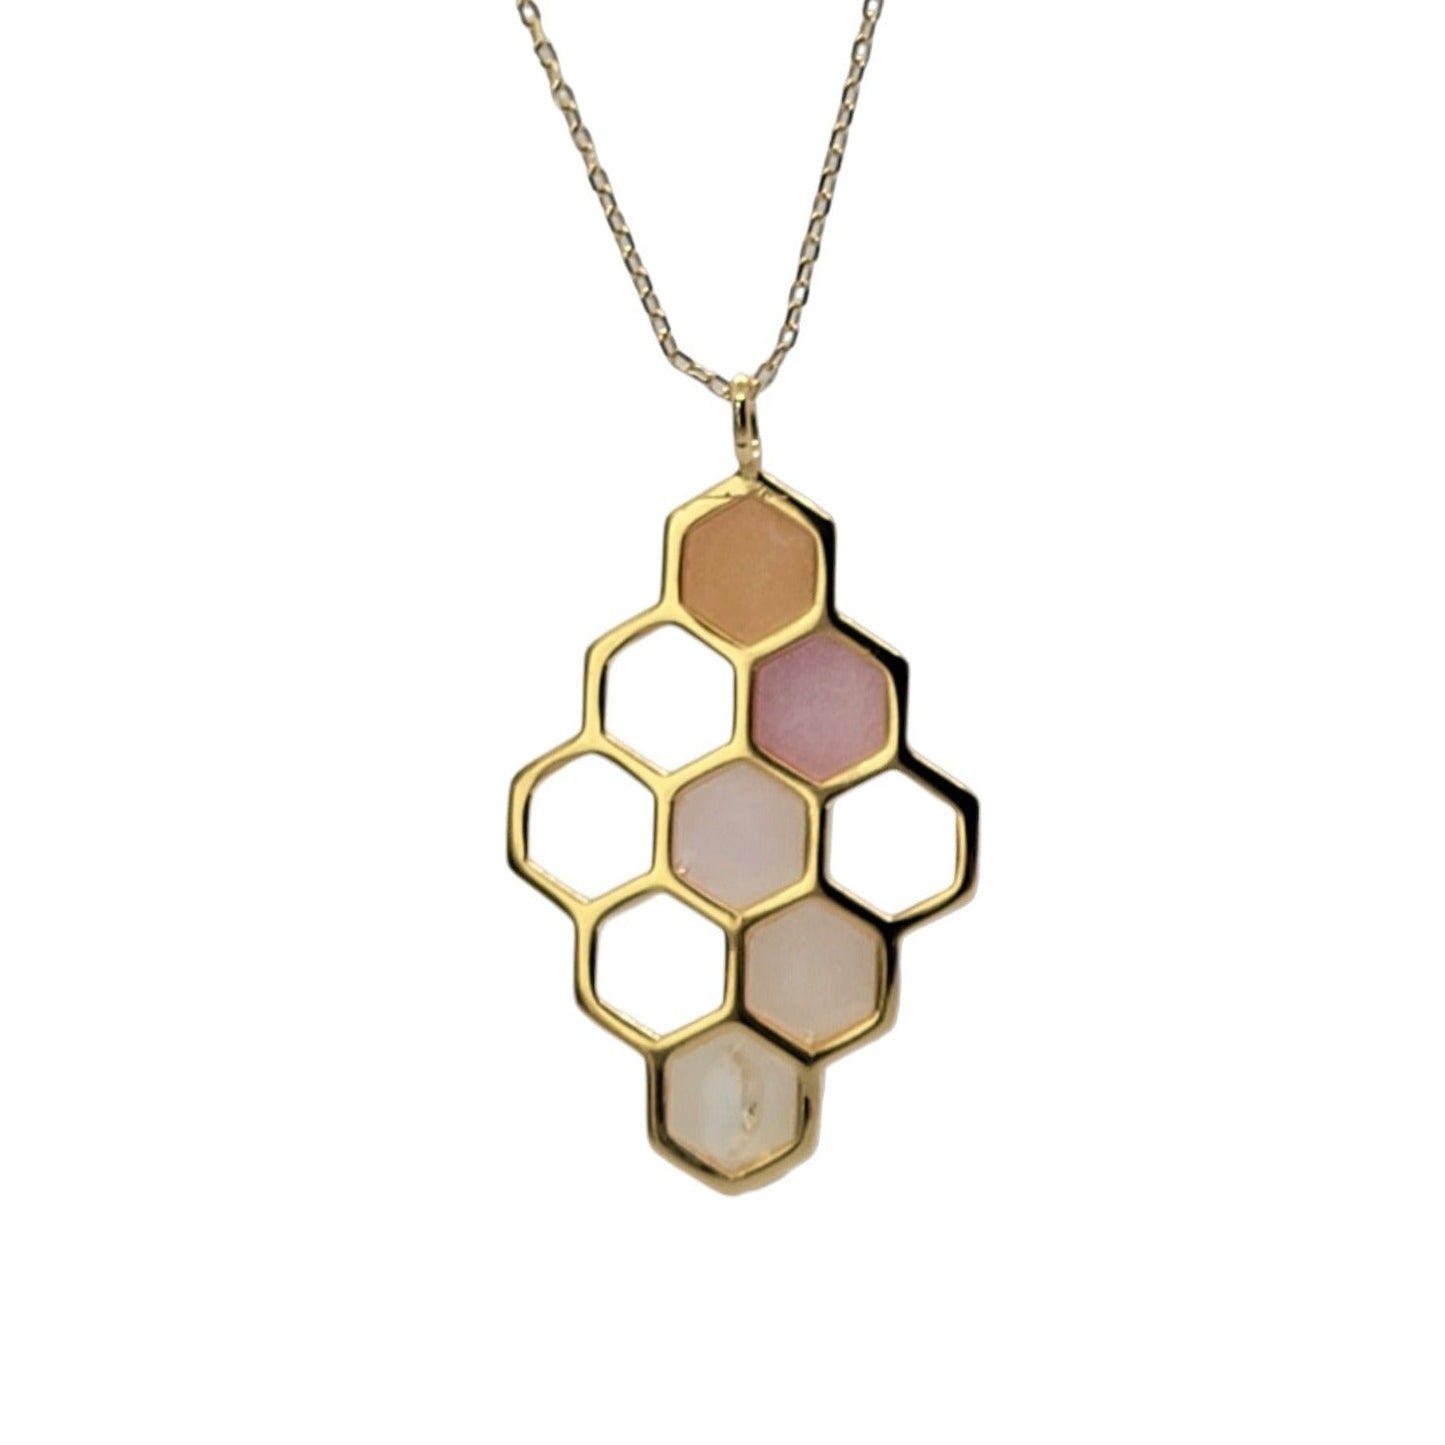 Honeycomb Necklace with Citrine and Pink and Gold Resins